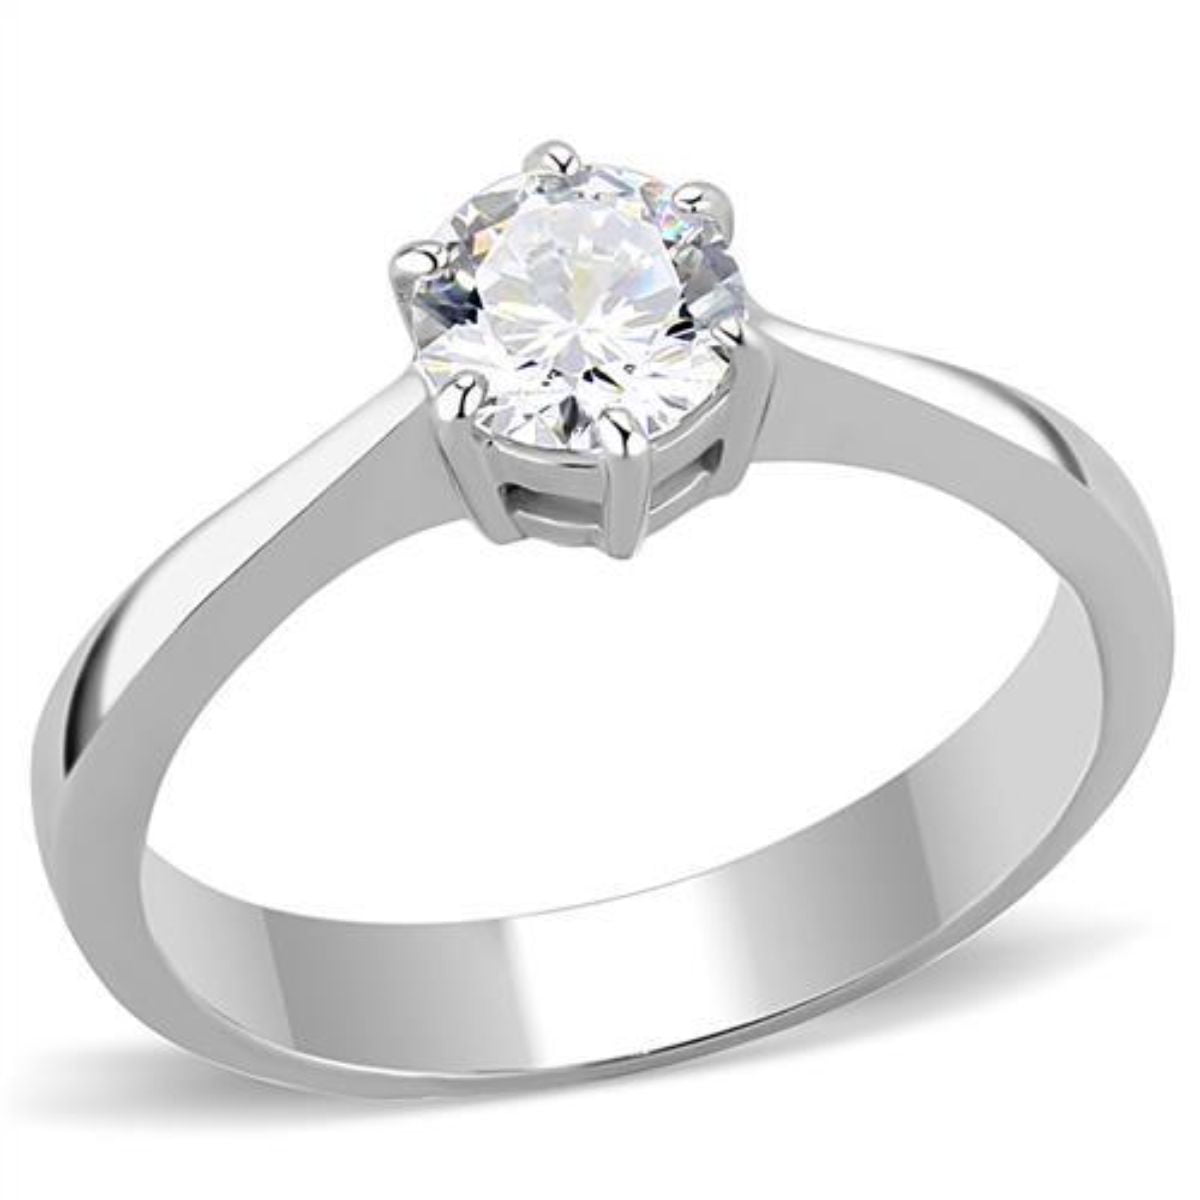 Stainless Steel Round Solitaire CZ Engagement Ring& Wedding Ring Set SIZE 5-10 